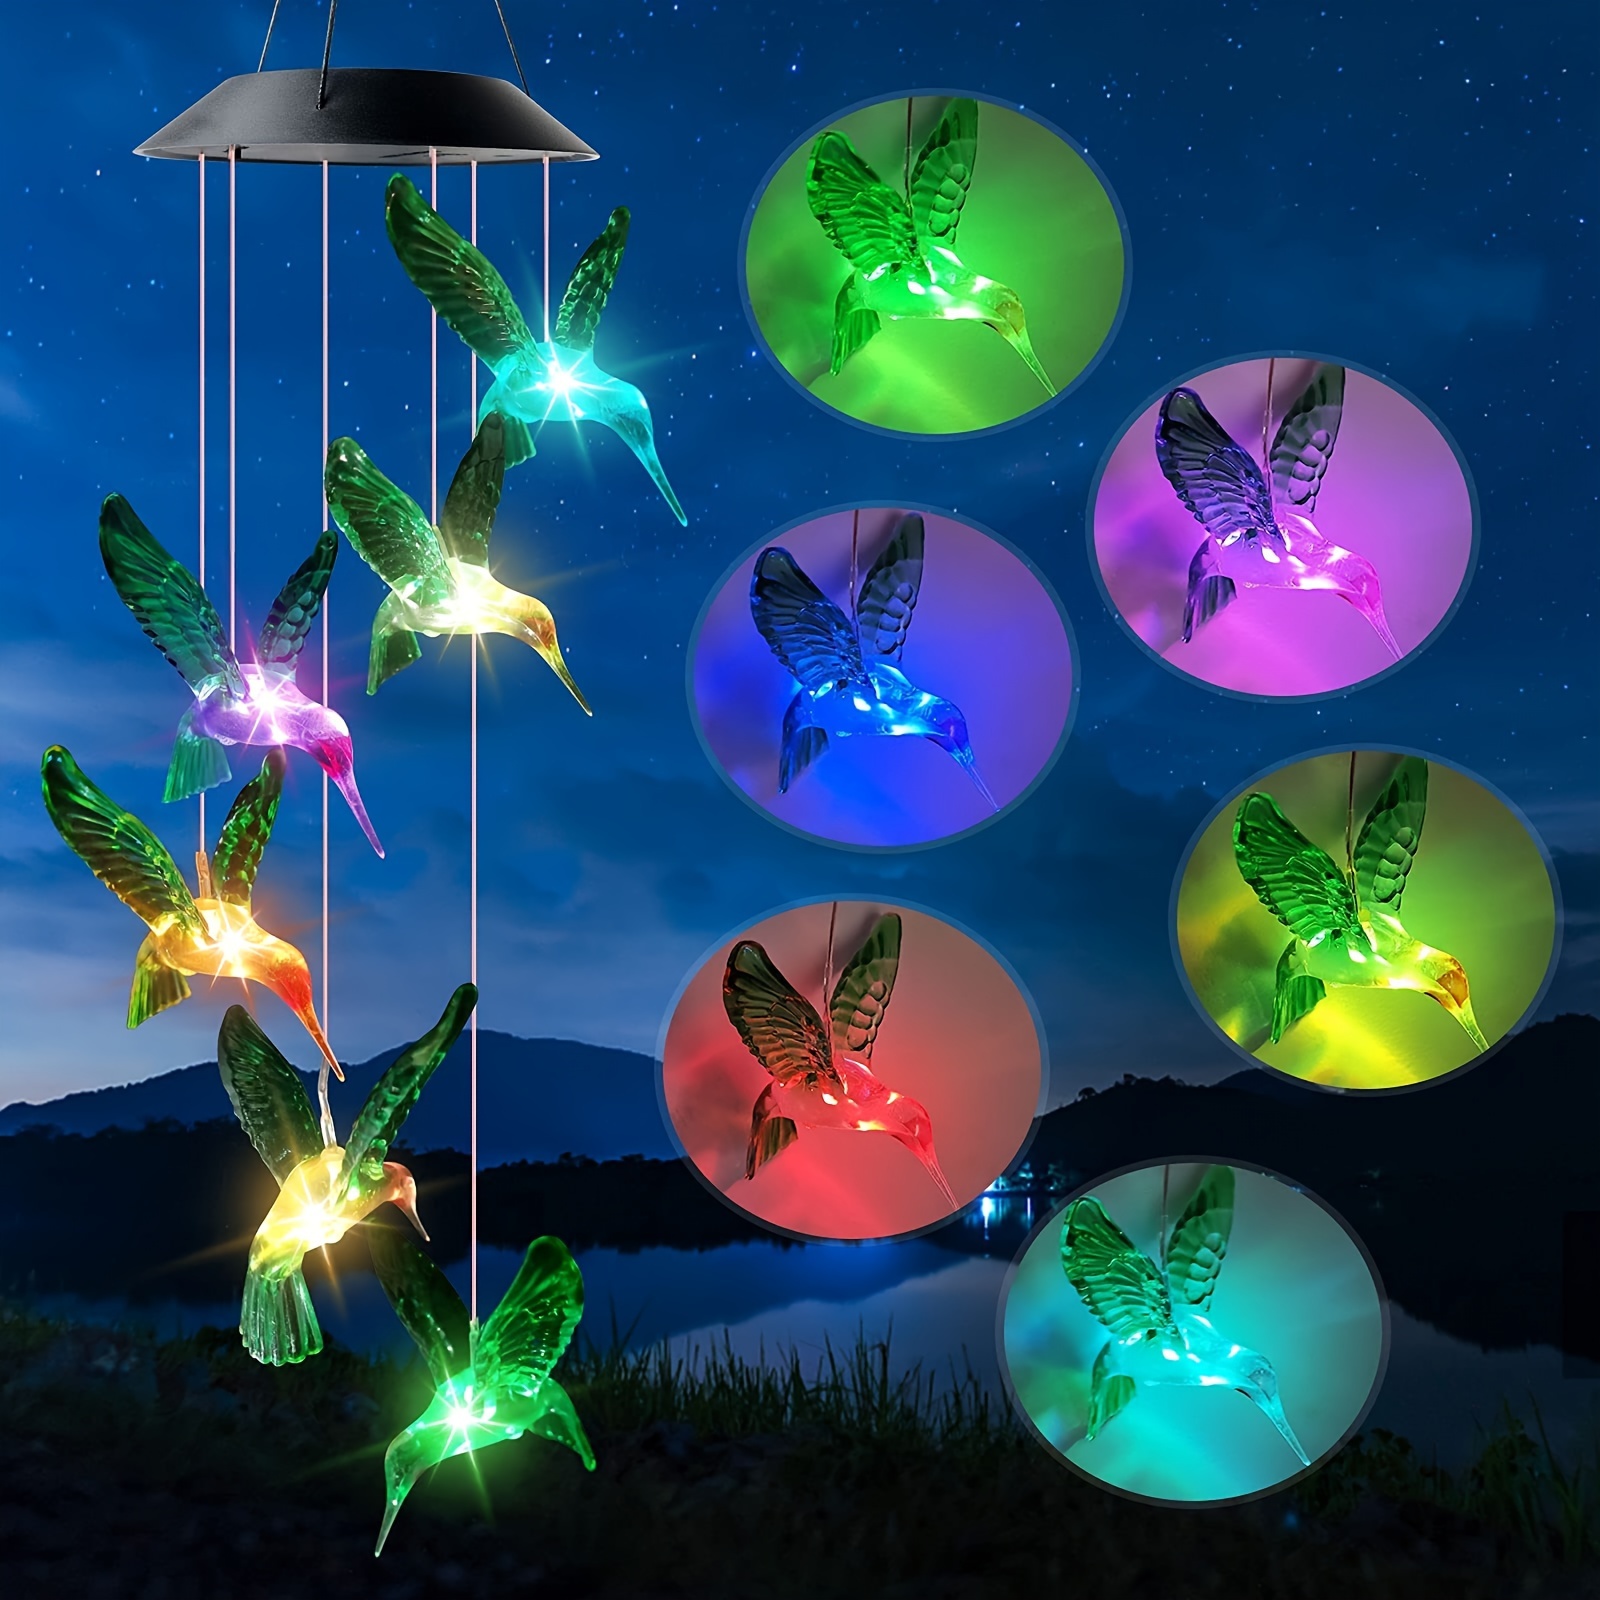 

Solar Hummingbird Wind Chimes Outdoor Indoor, Color Changing Led Solar Wind Chimes Lights, Colorful Decorative Moving Hanging Wind Chimes For Home, Yard, Garden, Hummingbird Birthday Gift For Women